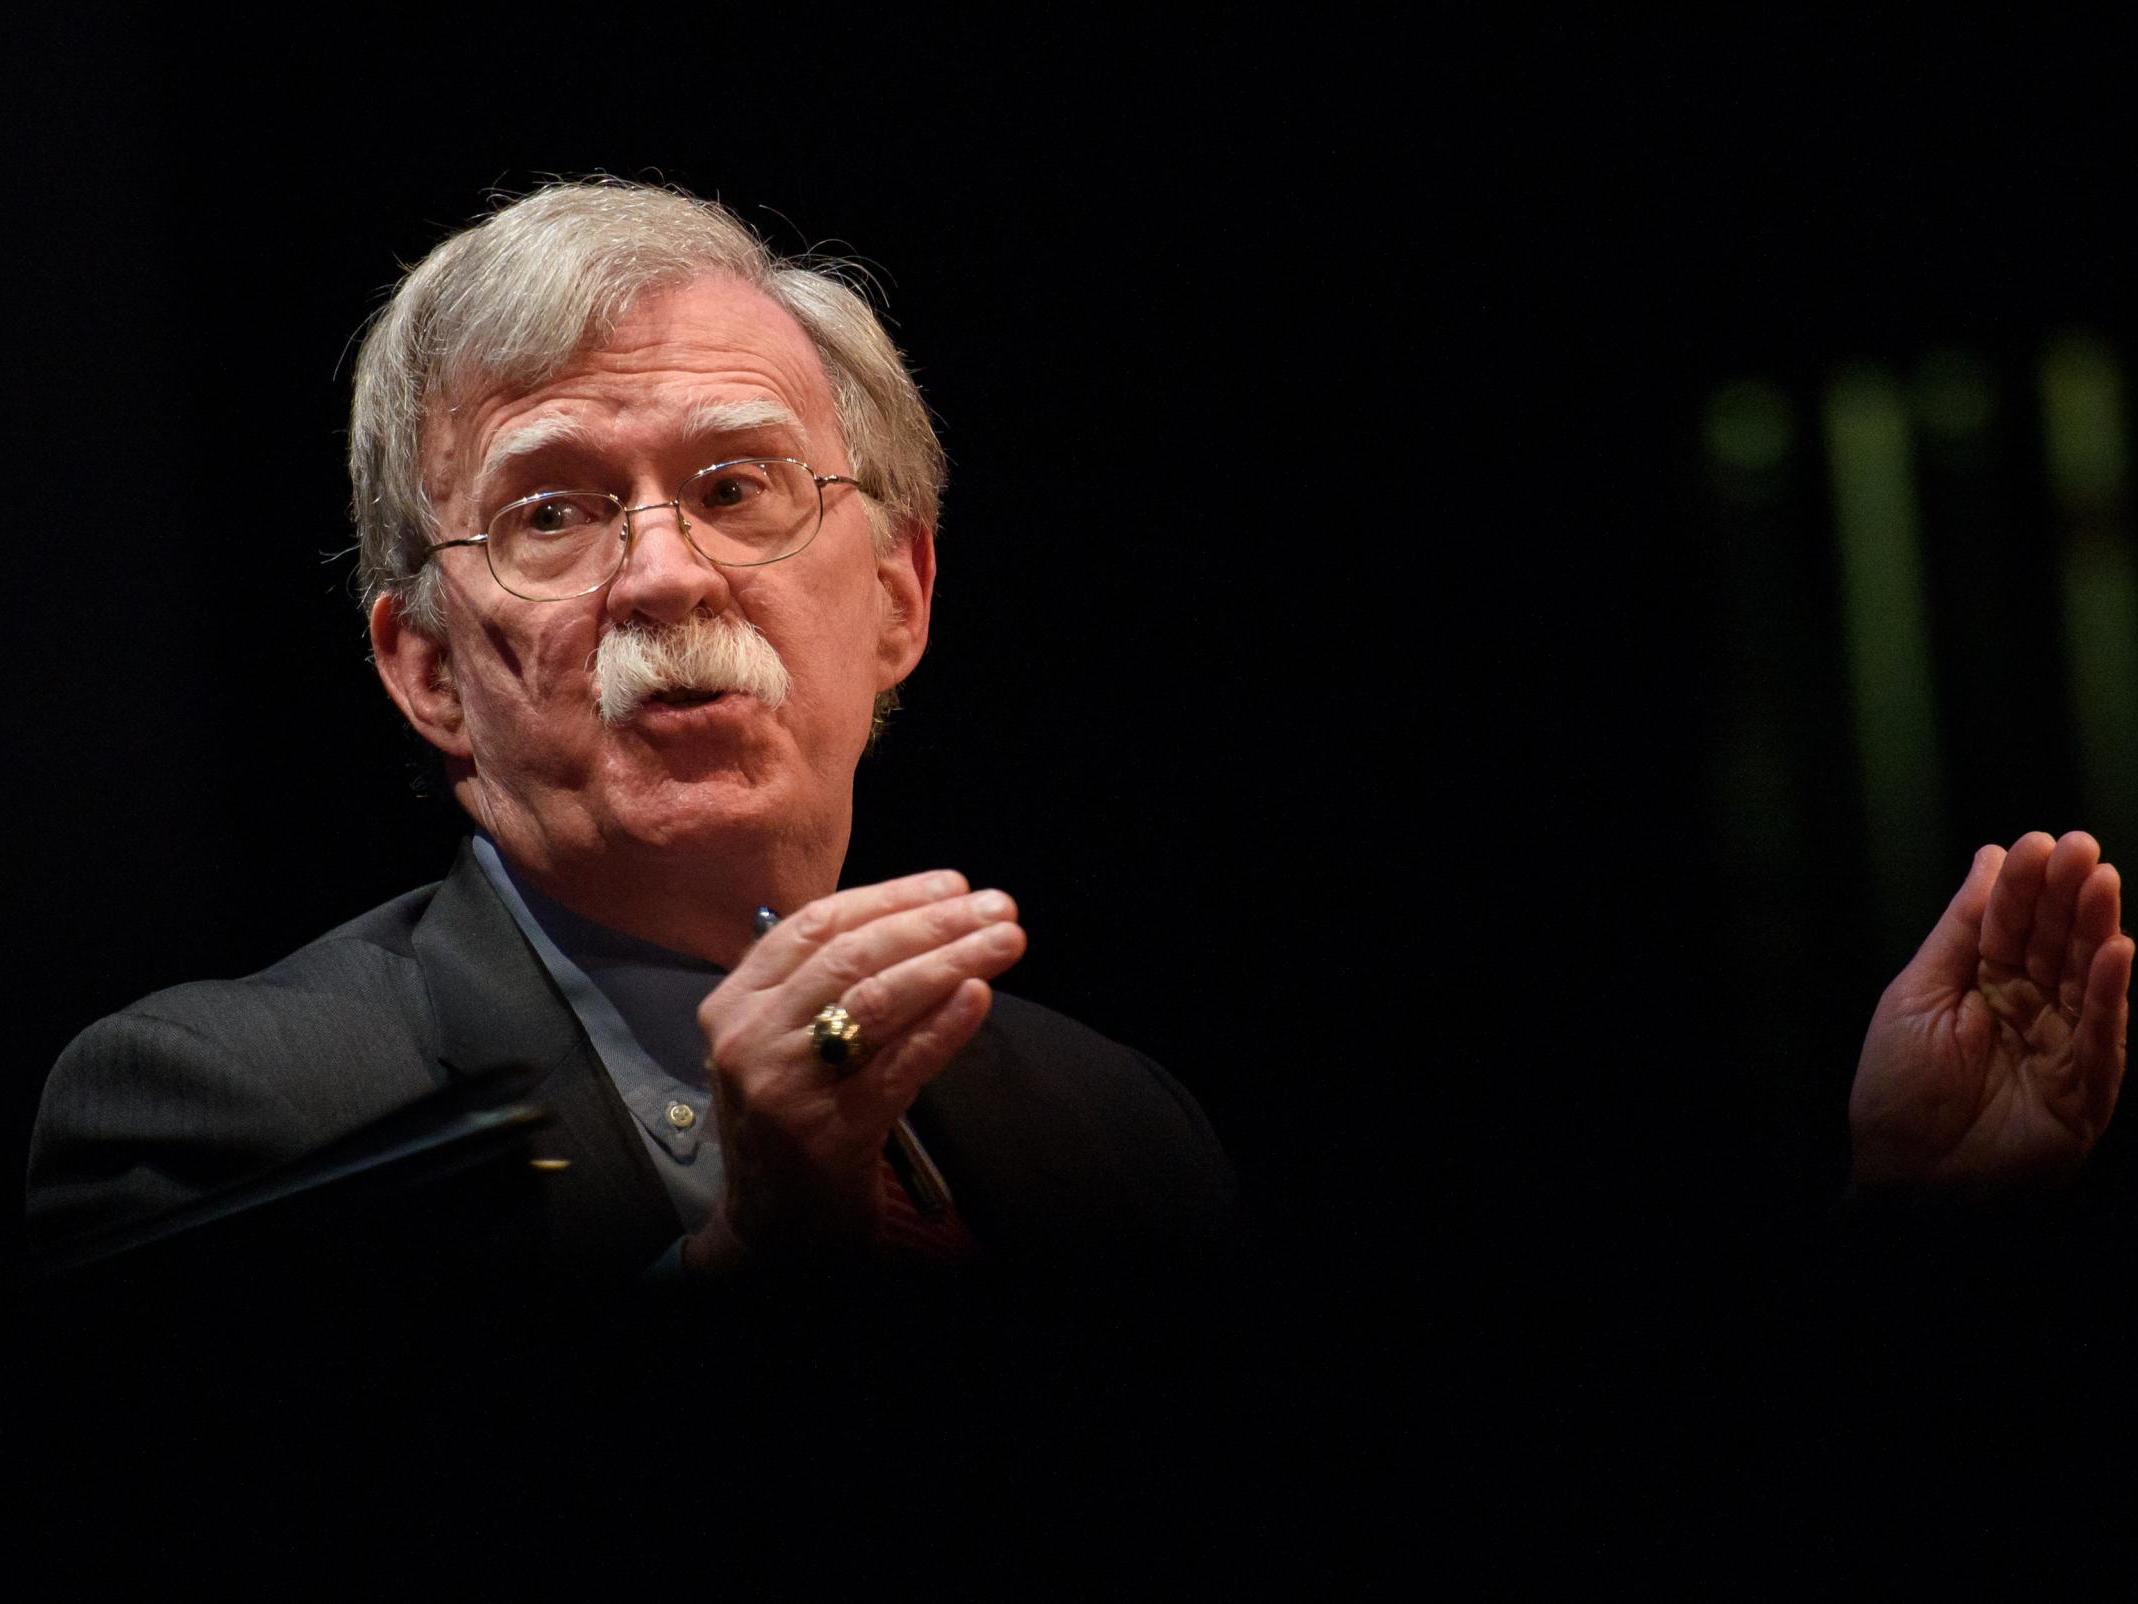 You could call John Bolton many things — but don't call him a truth-teller, and definitely don't call him a patriot